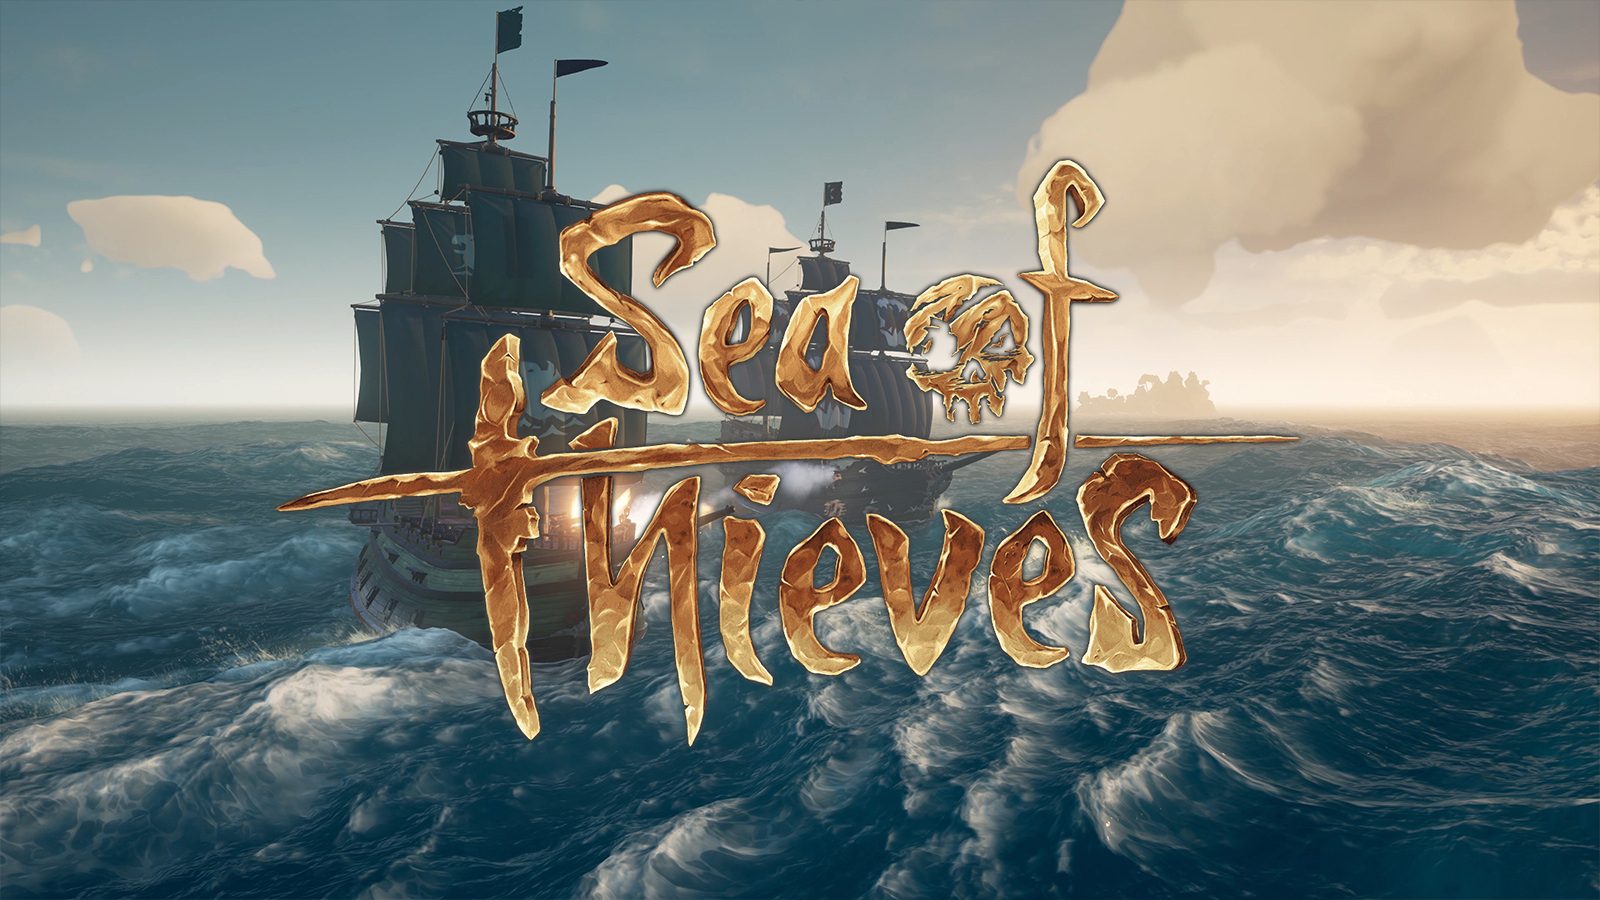 Sea of thieves ps4. Sea of Thieves обзор. Sea of Thieves (Xbox one). Sea of Thieves game Pass.